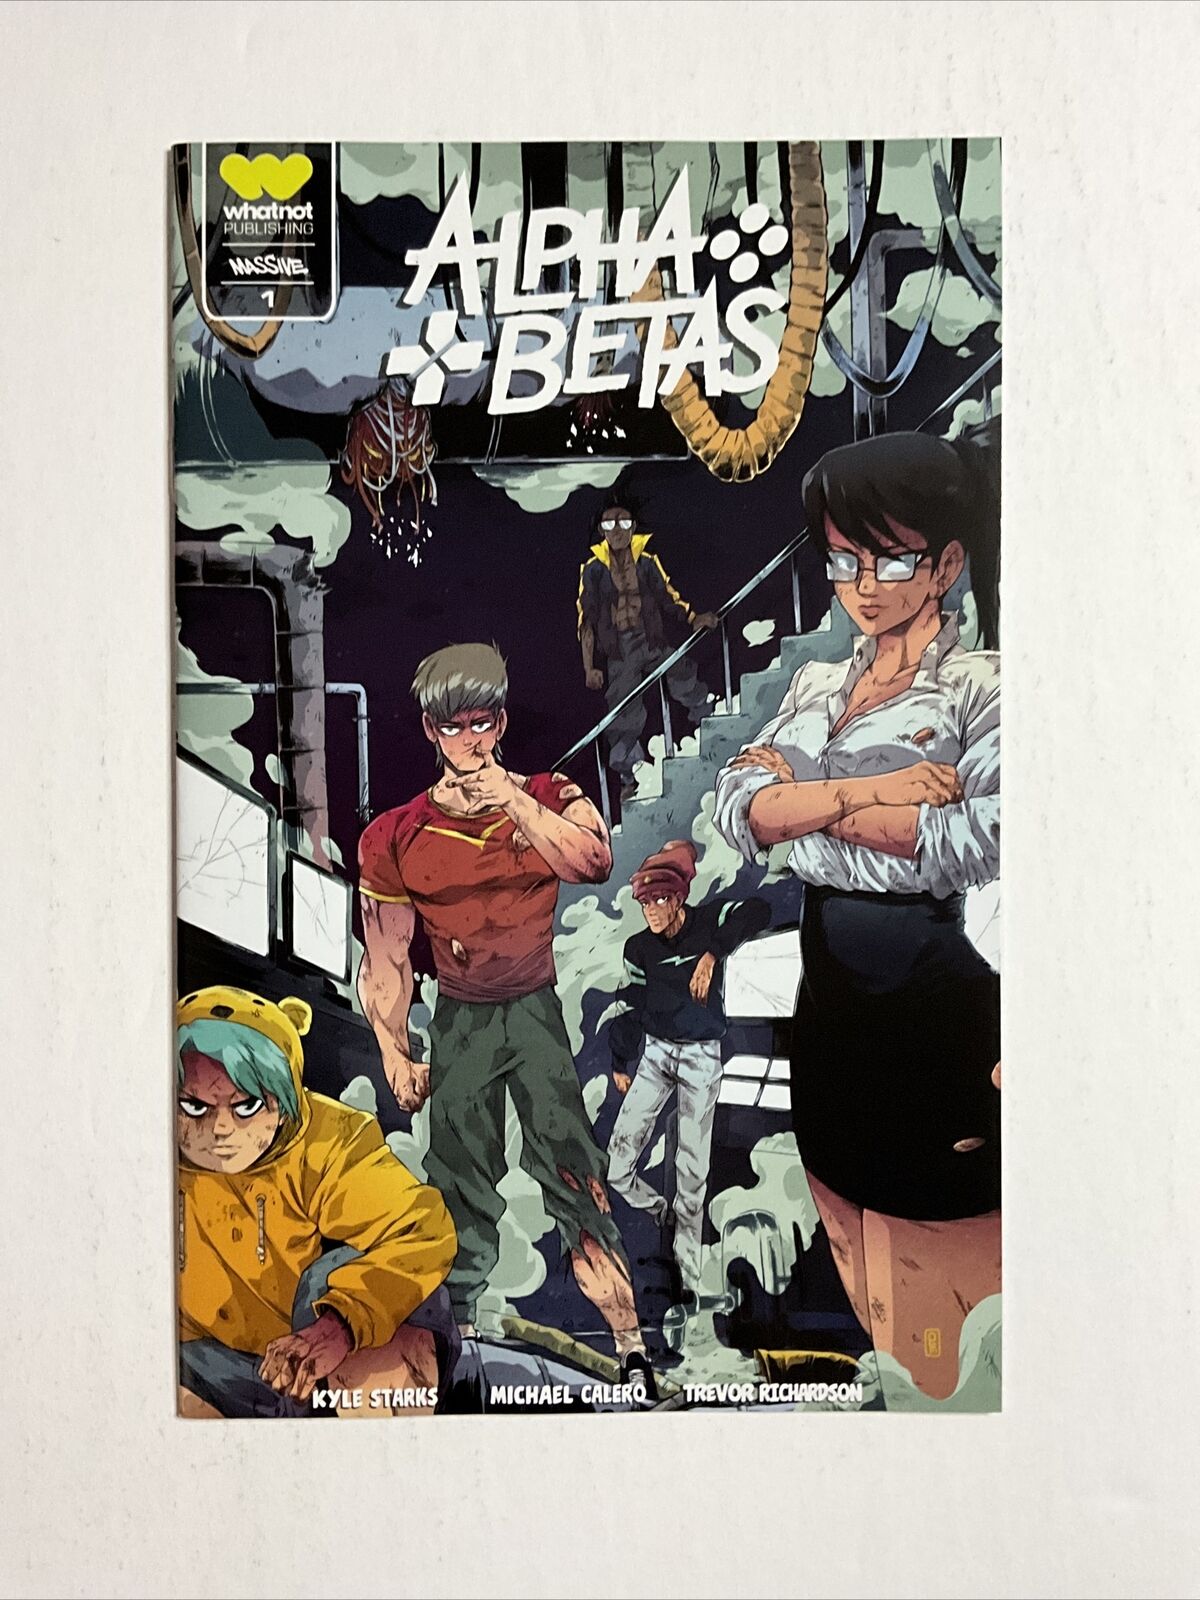 Alpha Betas #1 (2022) 9.4 NM Whatnot Exclusive Variant Cover LTD 1-300 Issues